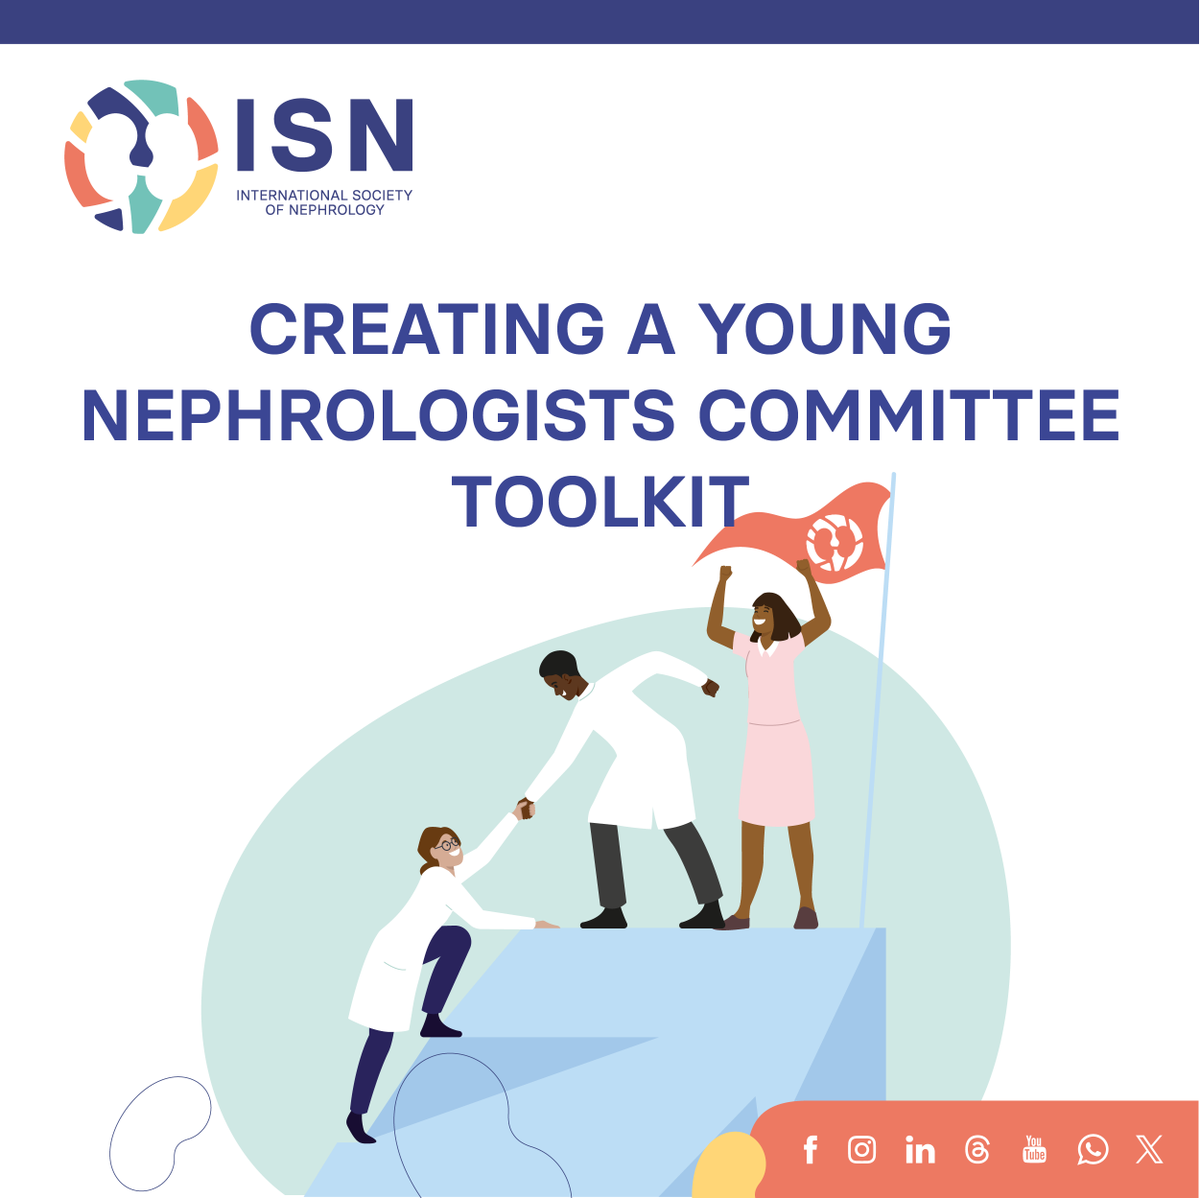 We are delighted to announce the Toolkit on Creating a Young Nephrologists Committee by #ISNyoung! This comprehensive manual empowers young nephrologists to build dedicated committees, addressing their challenges and career needs. Access the toolkit ➡️ ow.ly/jCHr50R9yKm